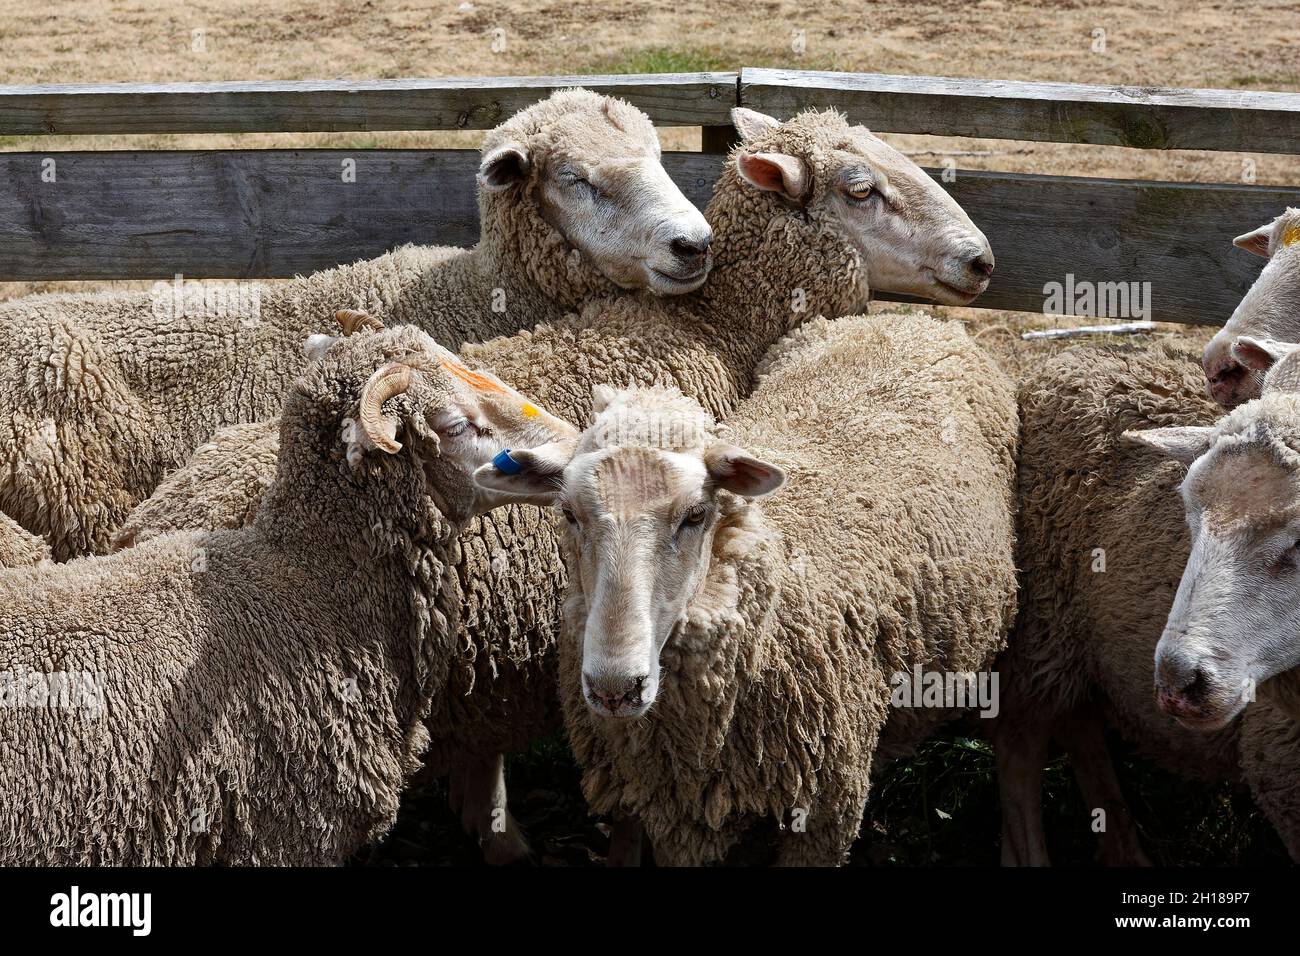 sheep in pen, close together, sheep station, wool business, animals, some face markings, South Island, New Zealand, PR Stock Photo